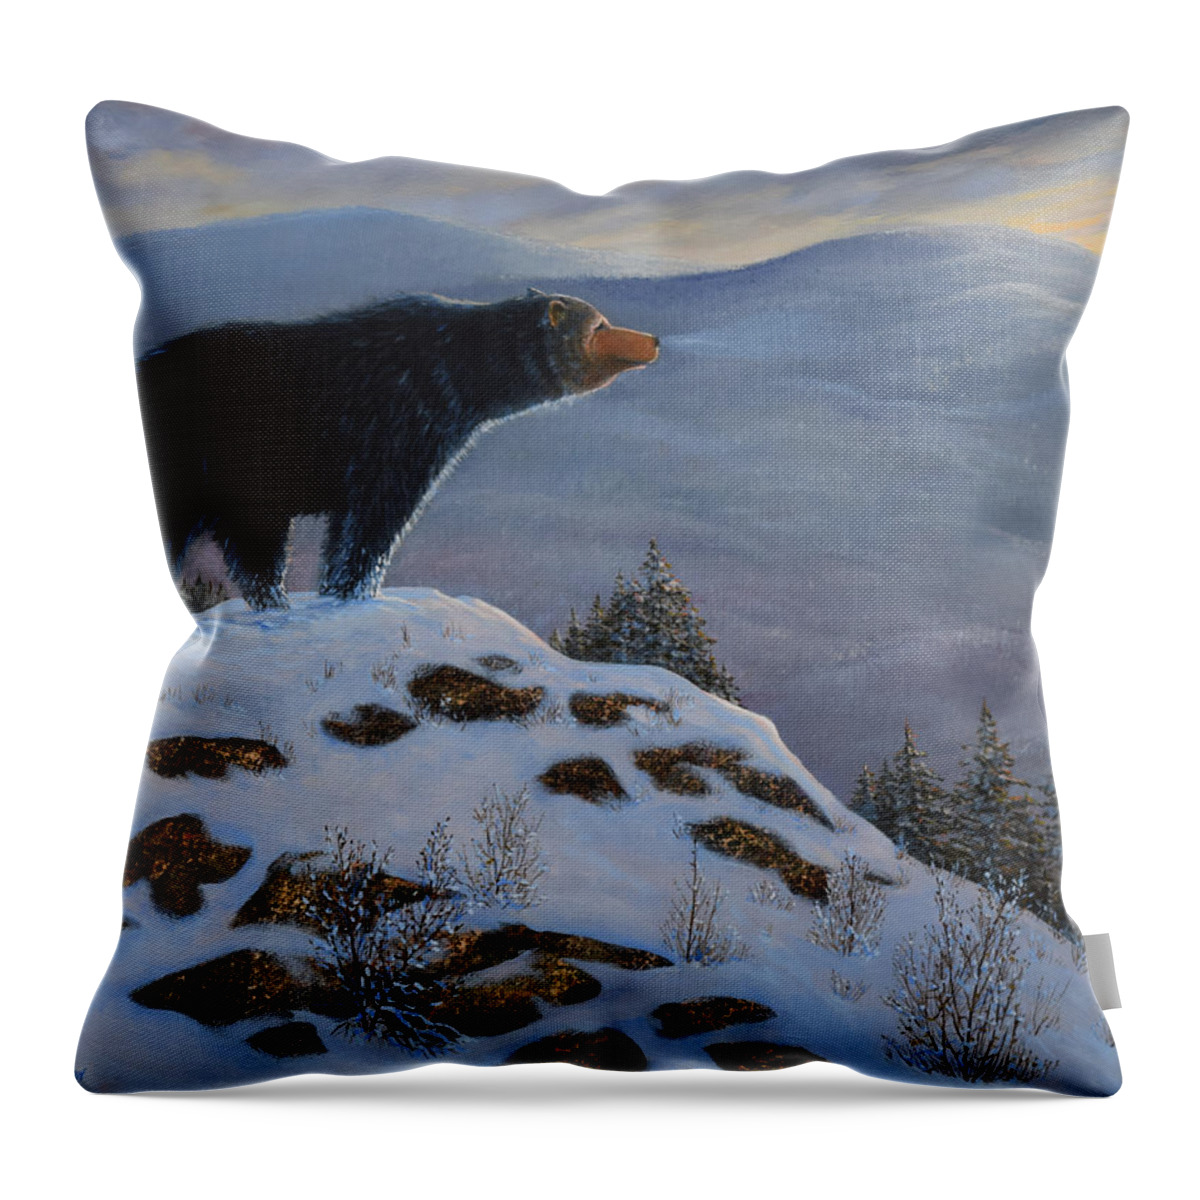 Wildlife Throw Pillow featuring the painting Last Look Black Bear by Frank Wilson